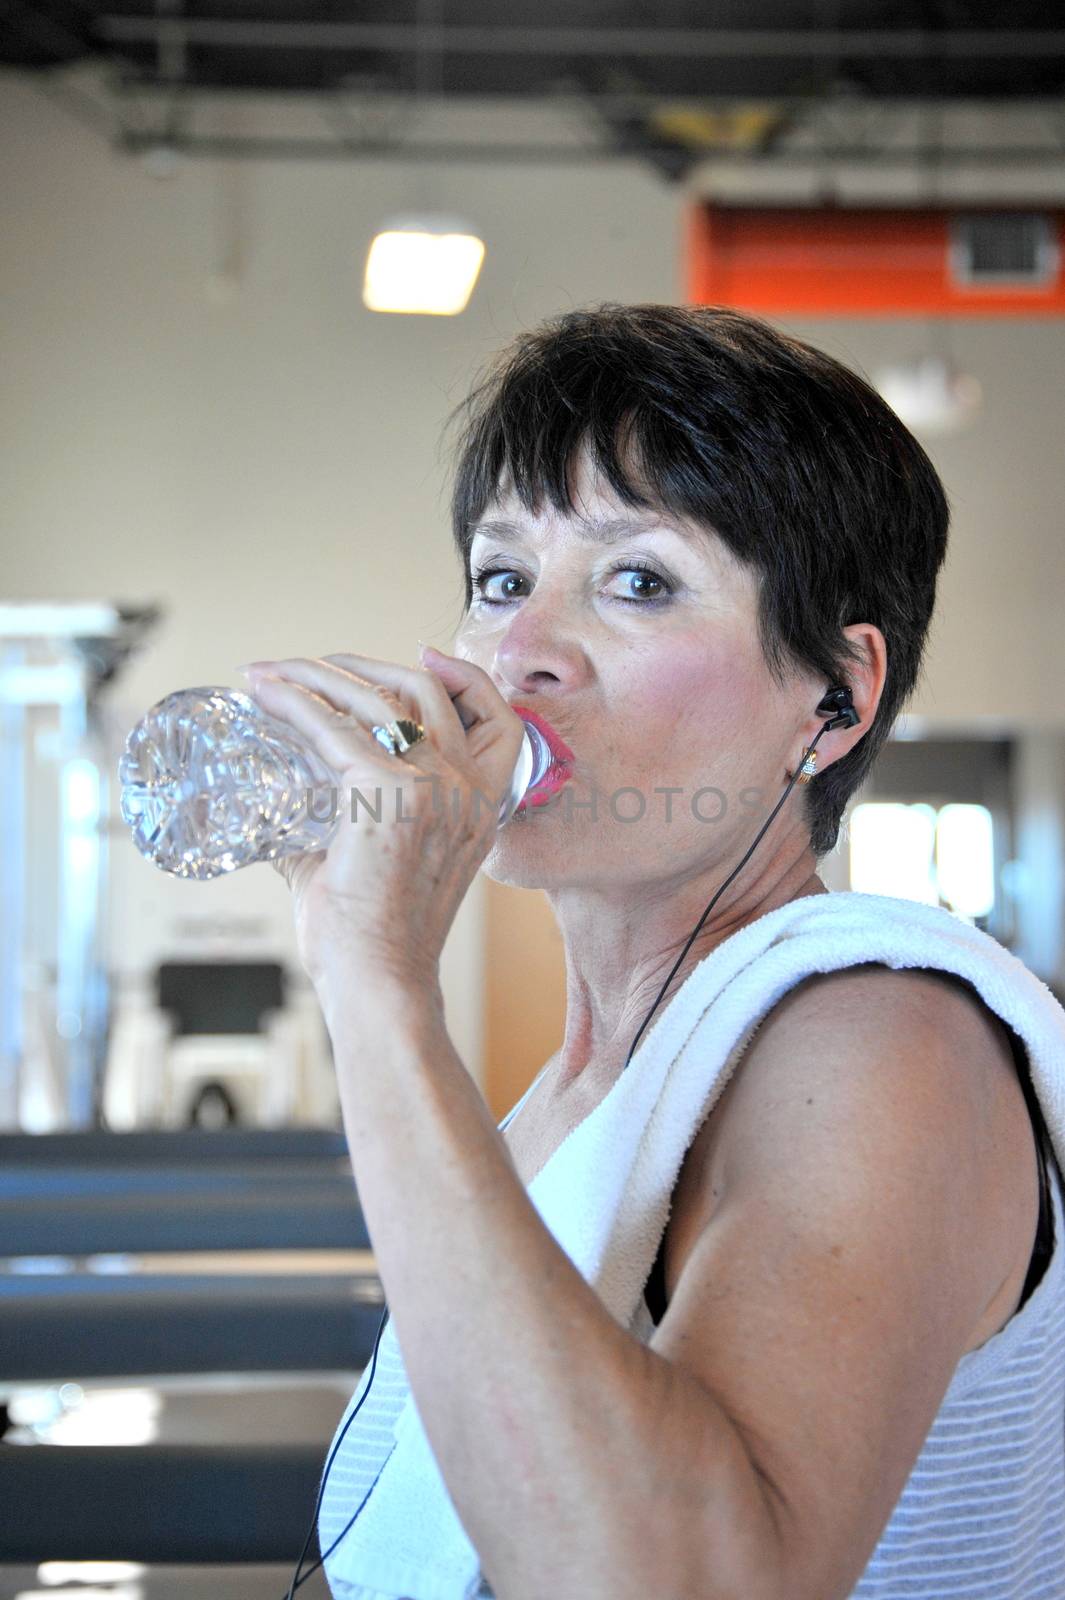 Mature female beauty working out inside a health club.